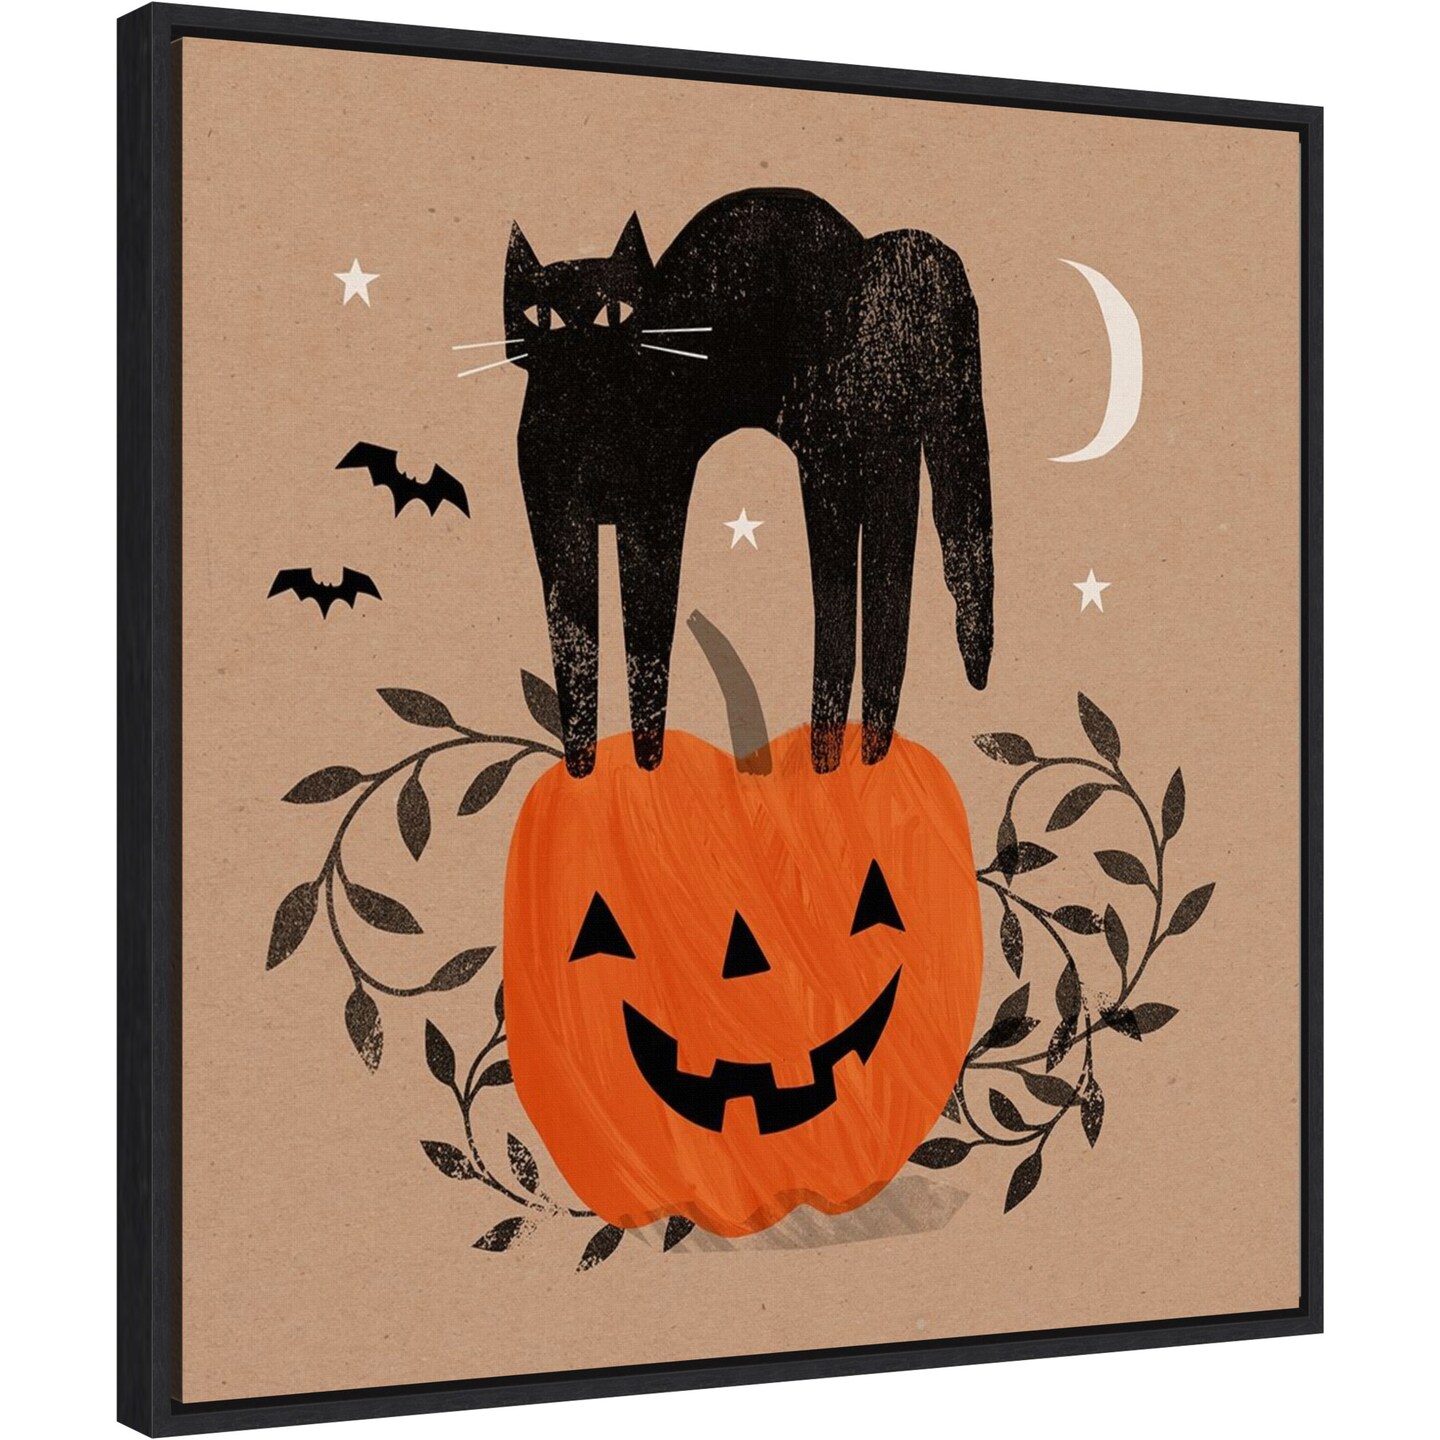 Halloween Cat Graphic I by Victoria Barnes 22-in. W x 22-in. H. Canvas Wall Art Print Framed in Black